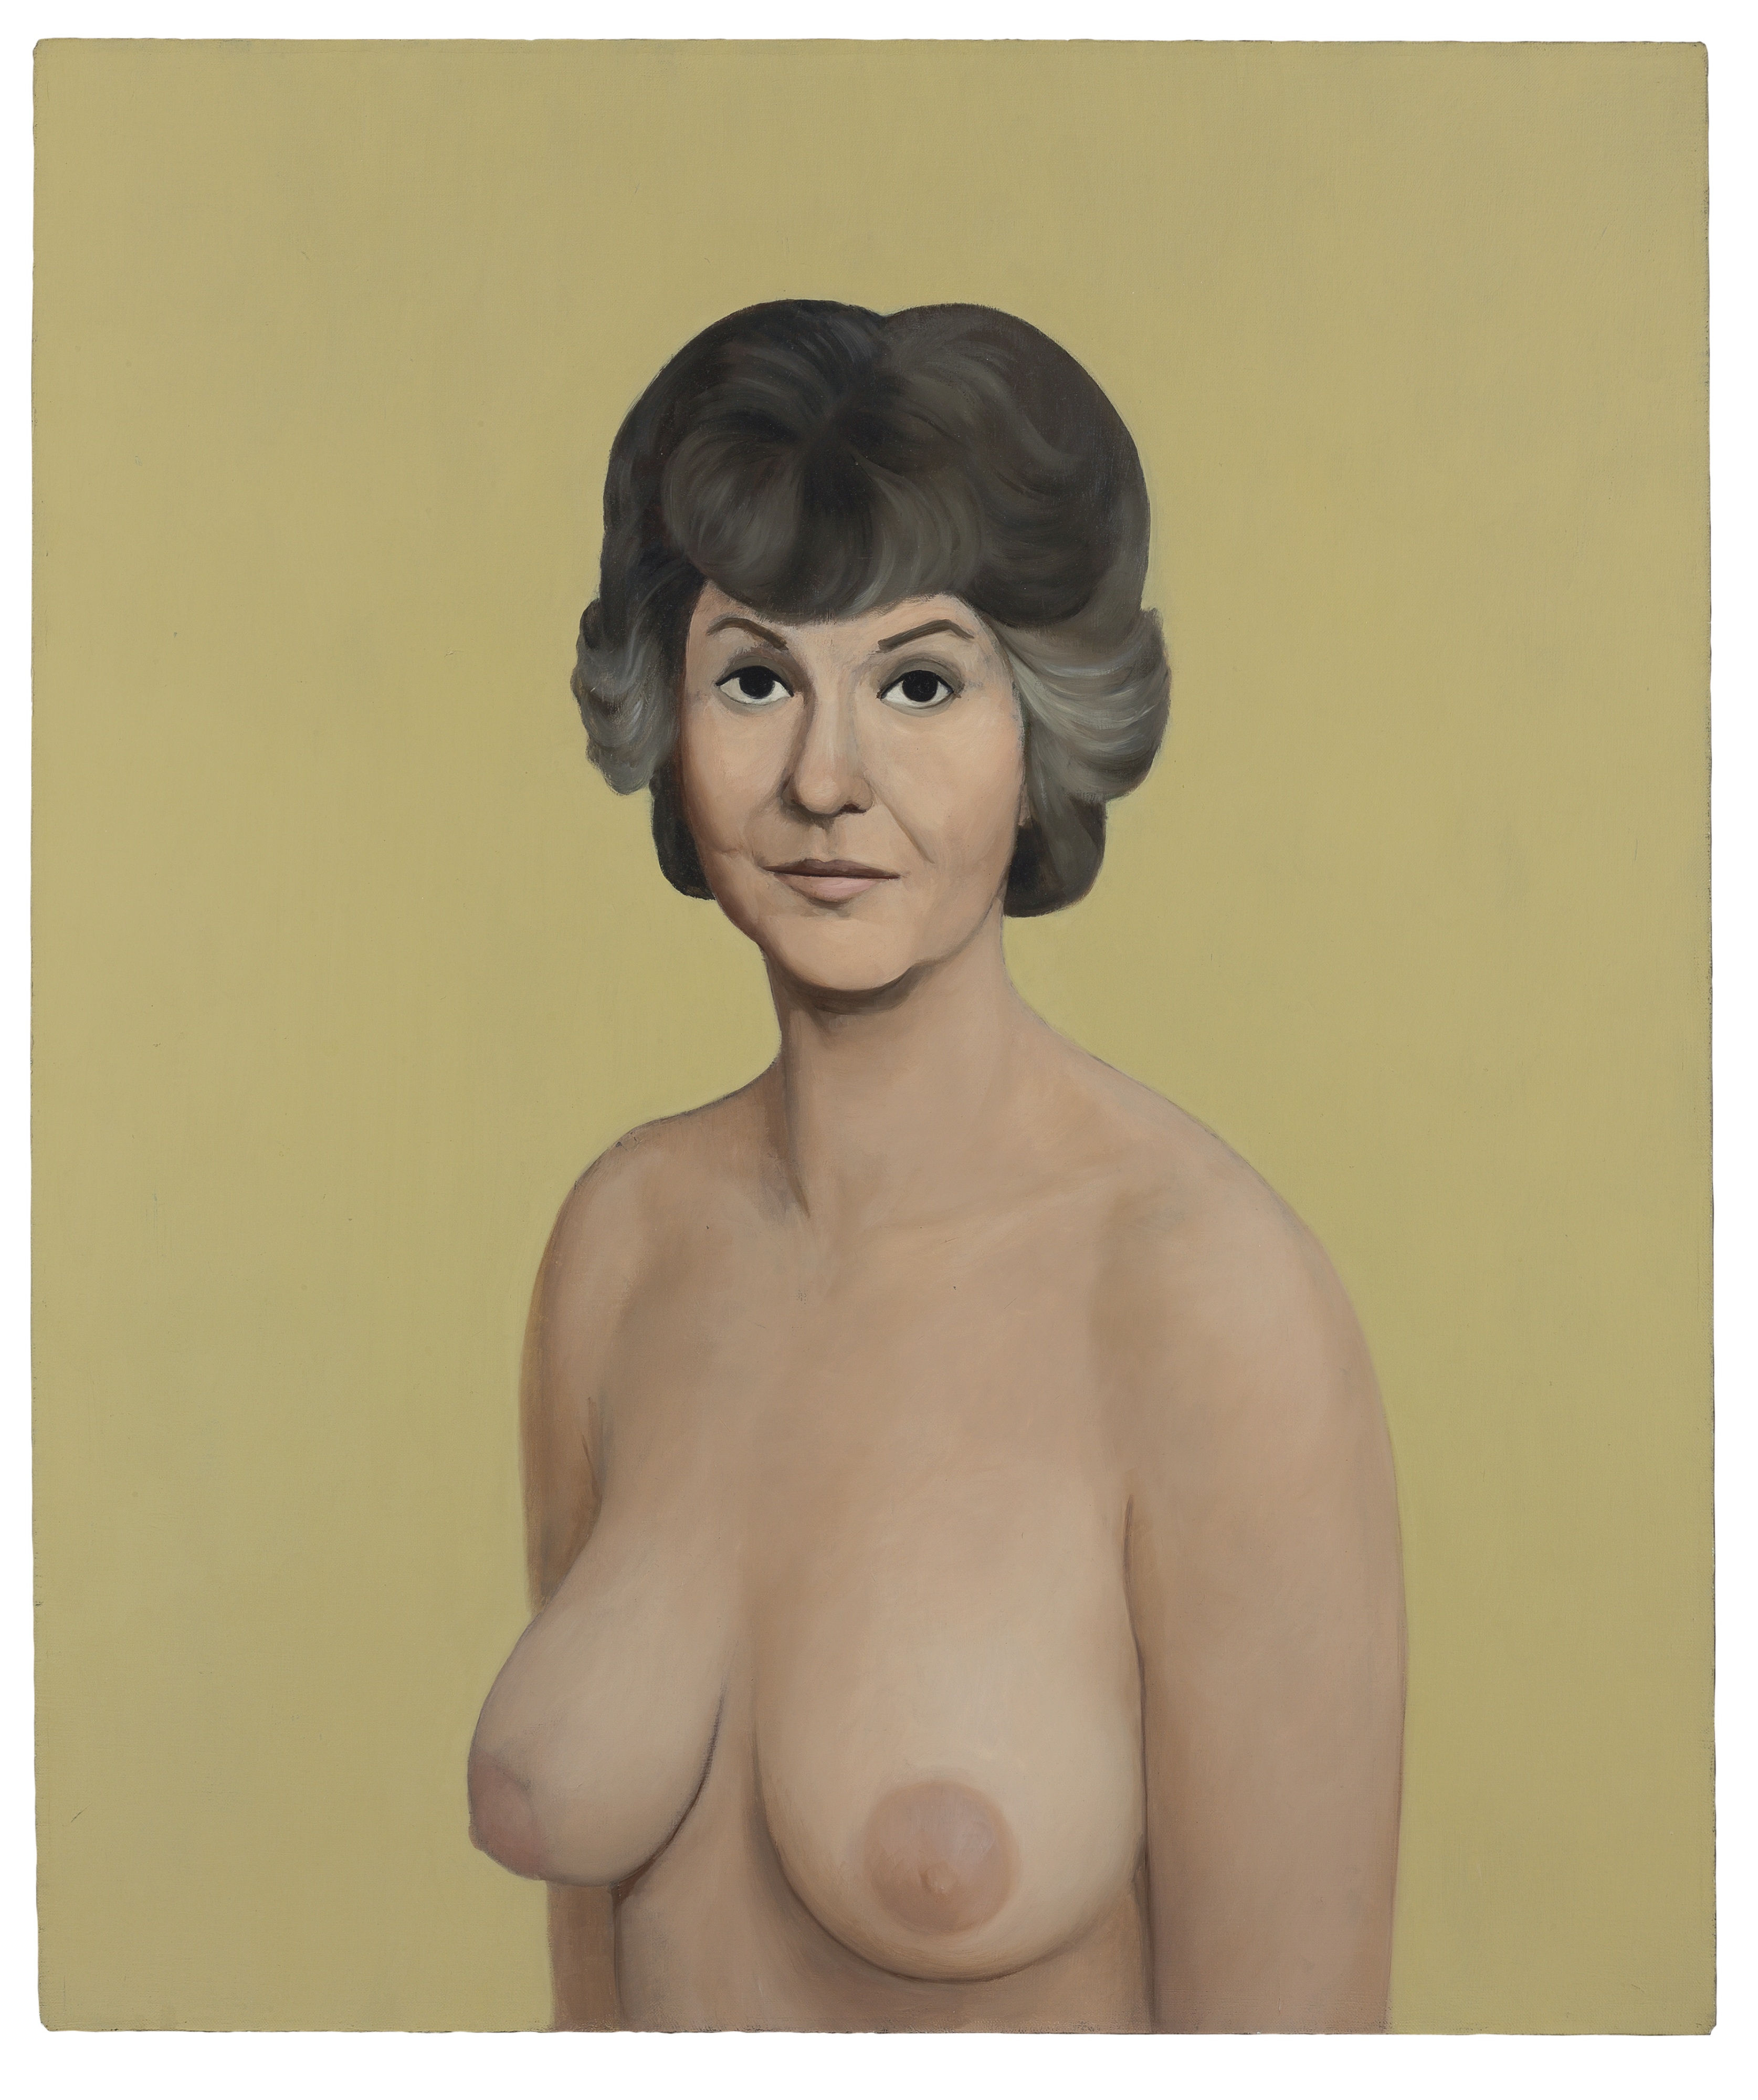 Naked Topless Bea Arthur Painting Sells At Auction For $1.9M image image